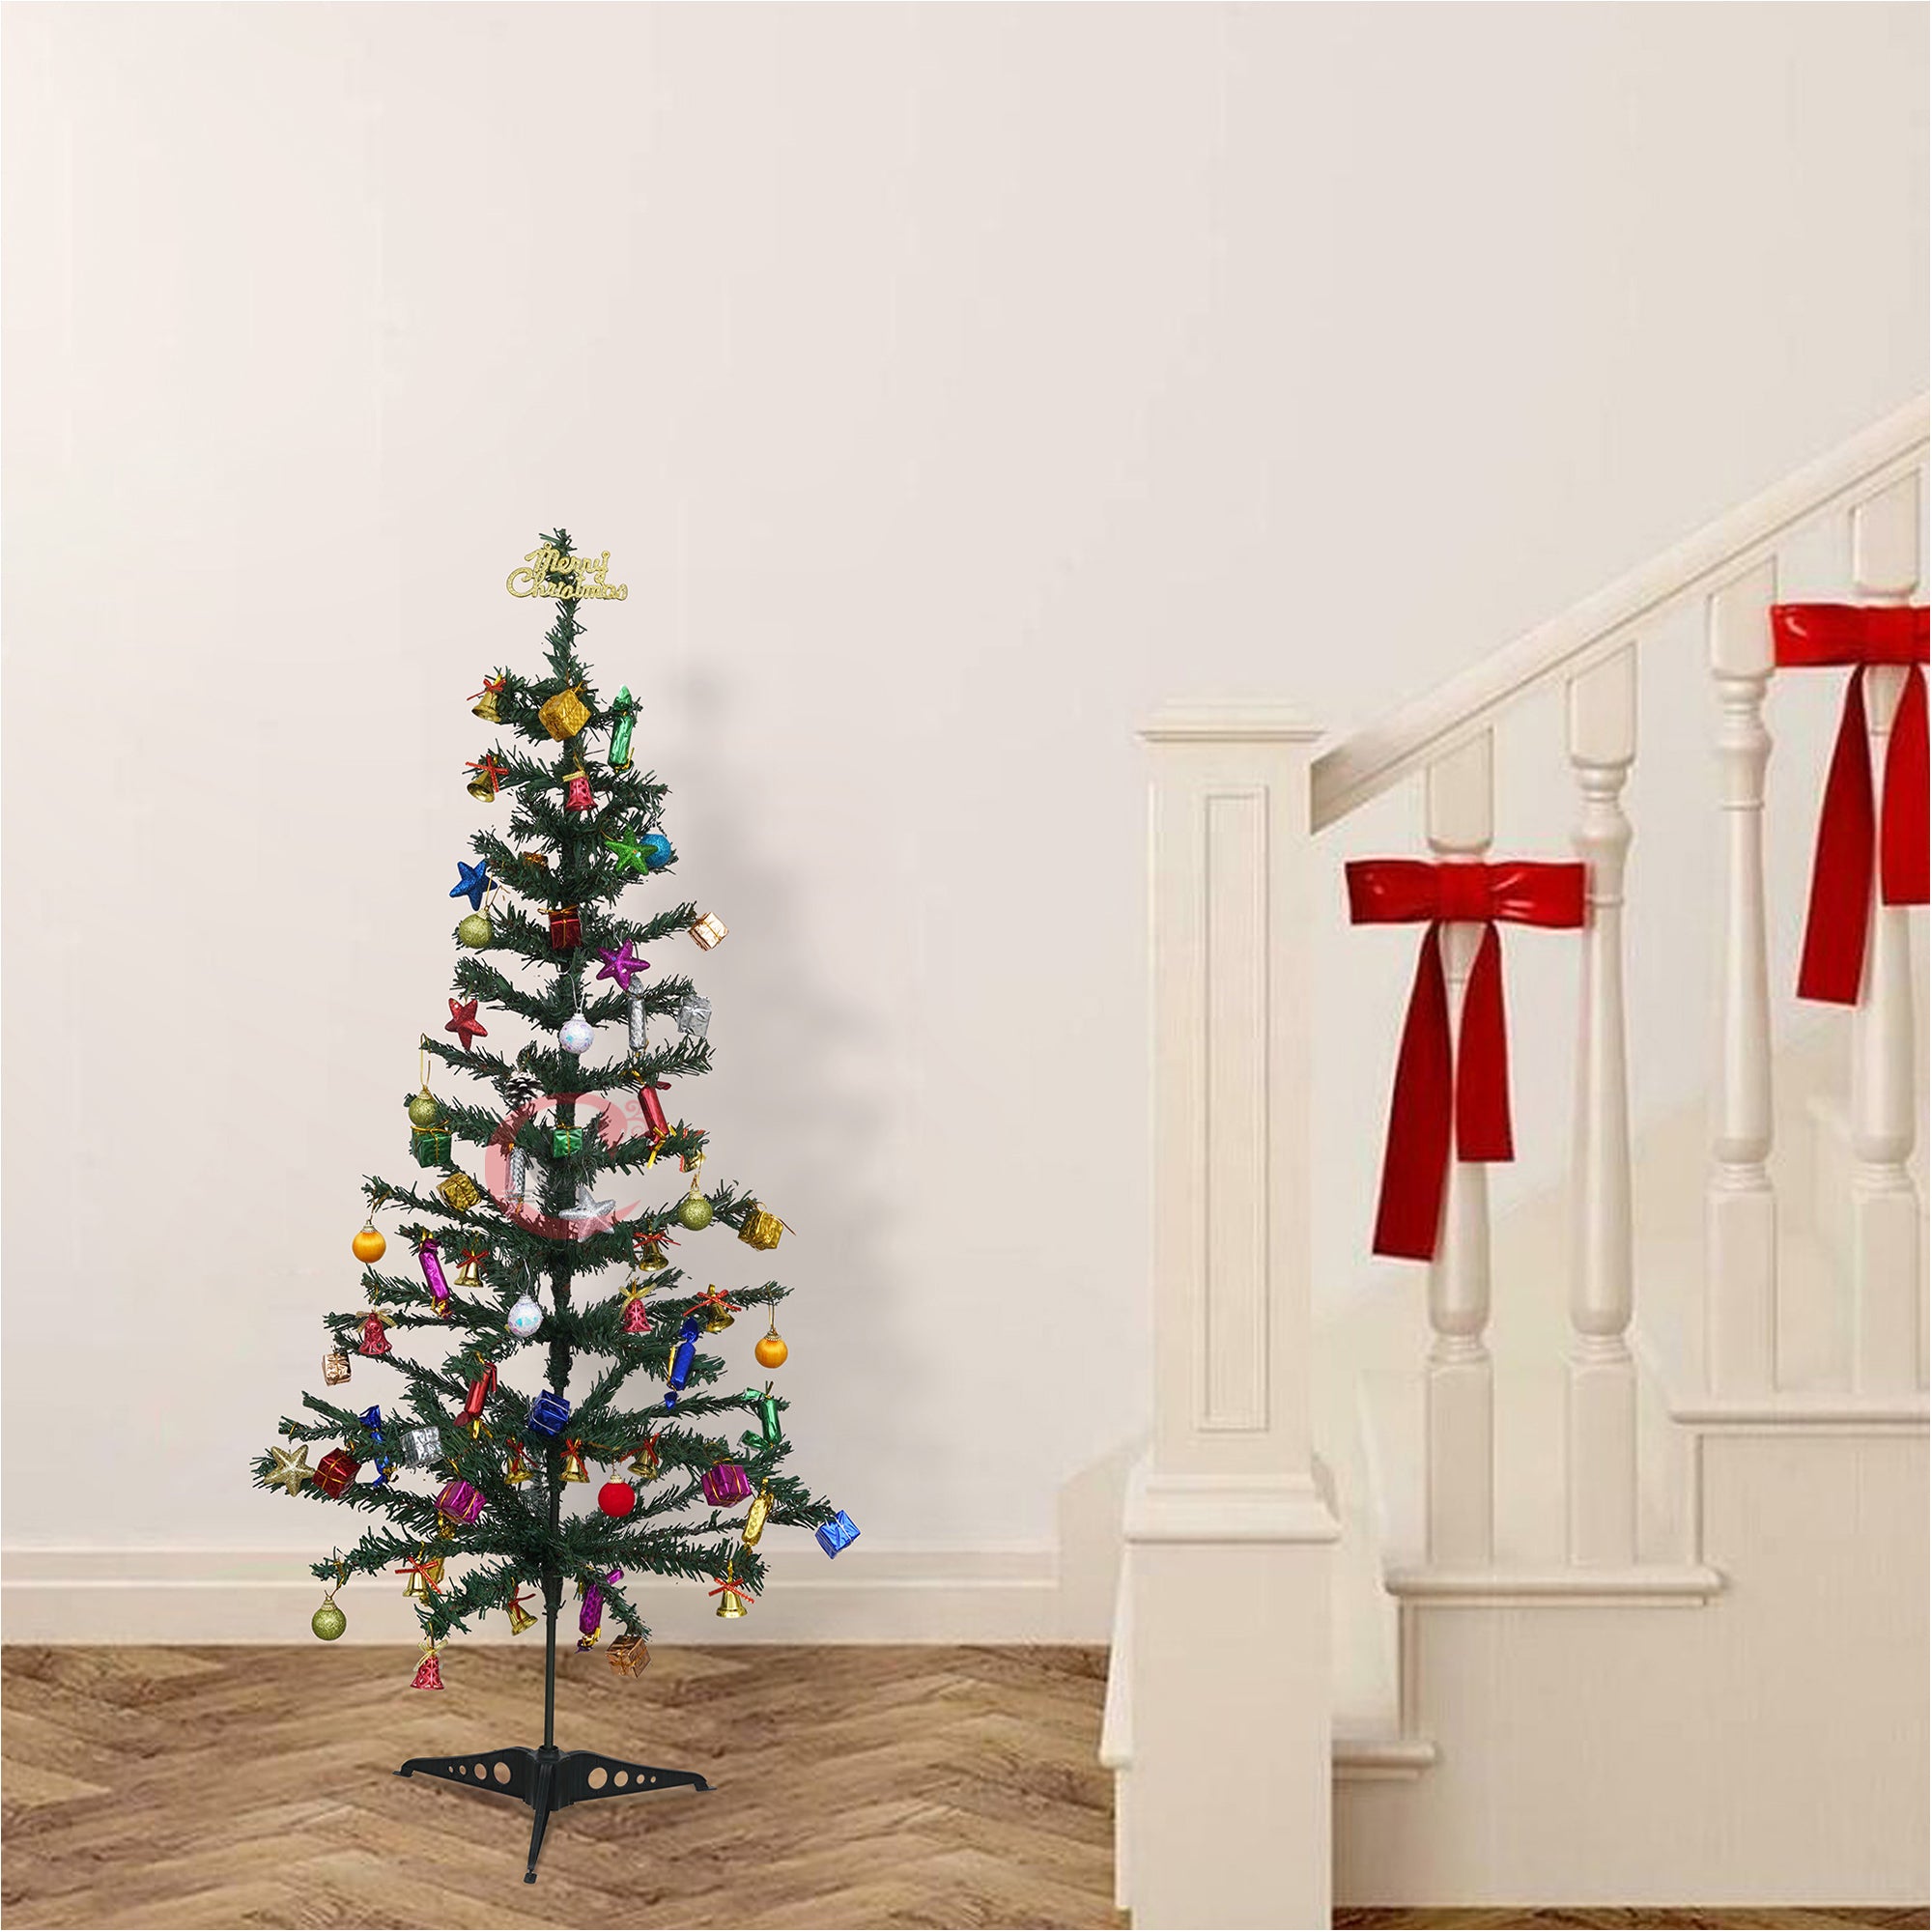 eCraftIndia 3 Feet Green Artificial Christmas Tree Xmas Pine Tree with Stand and 60 Christmas Decoration Ornaments Props - Merry Christmas Decoration Item for Home, Office, and Church 1